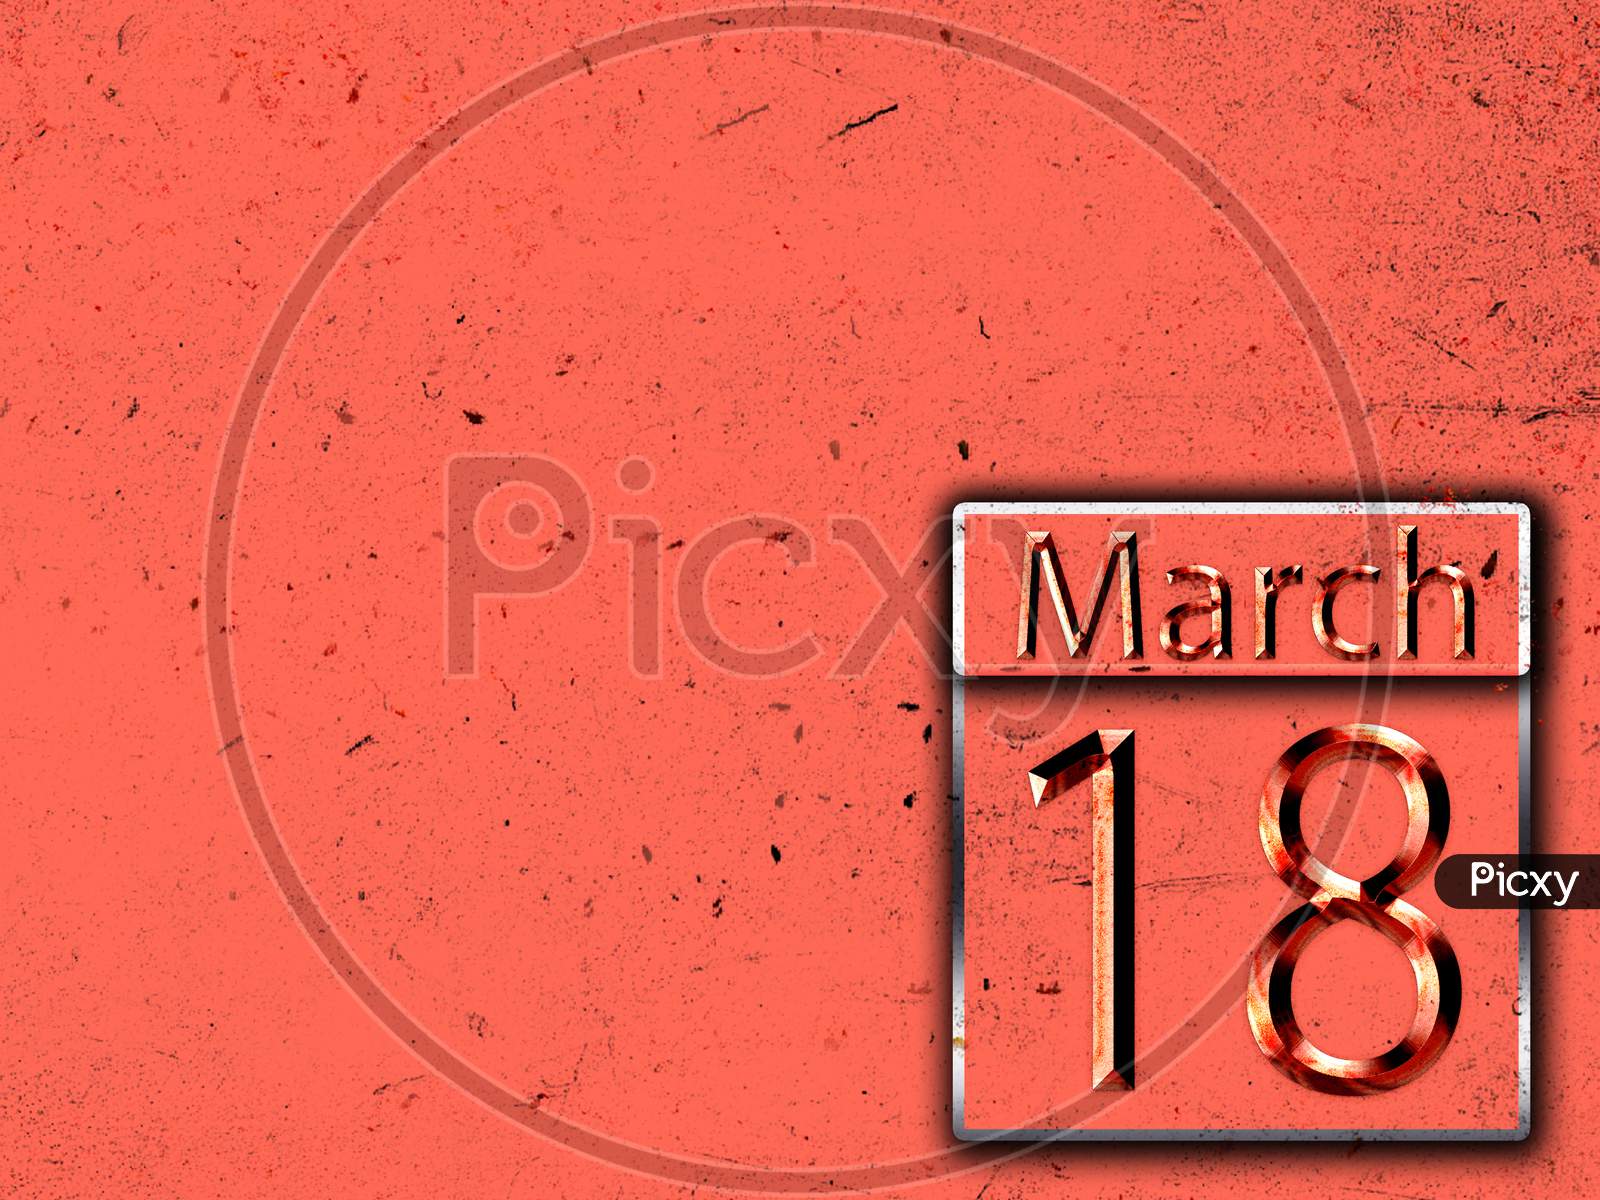 18 March, Monthly Calendar On Backgrand